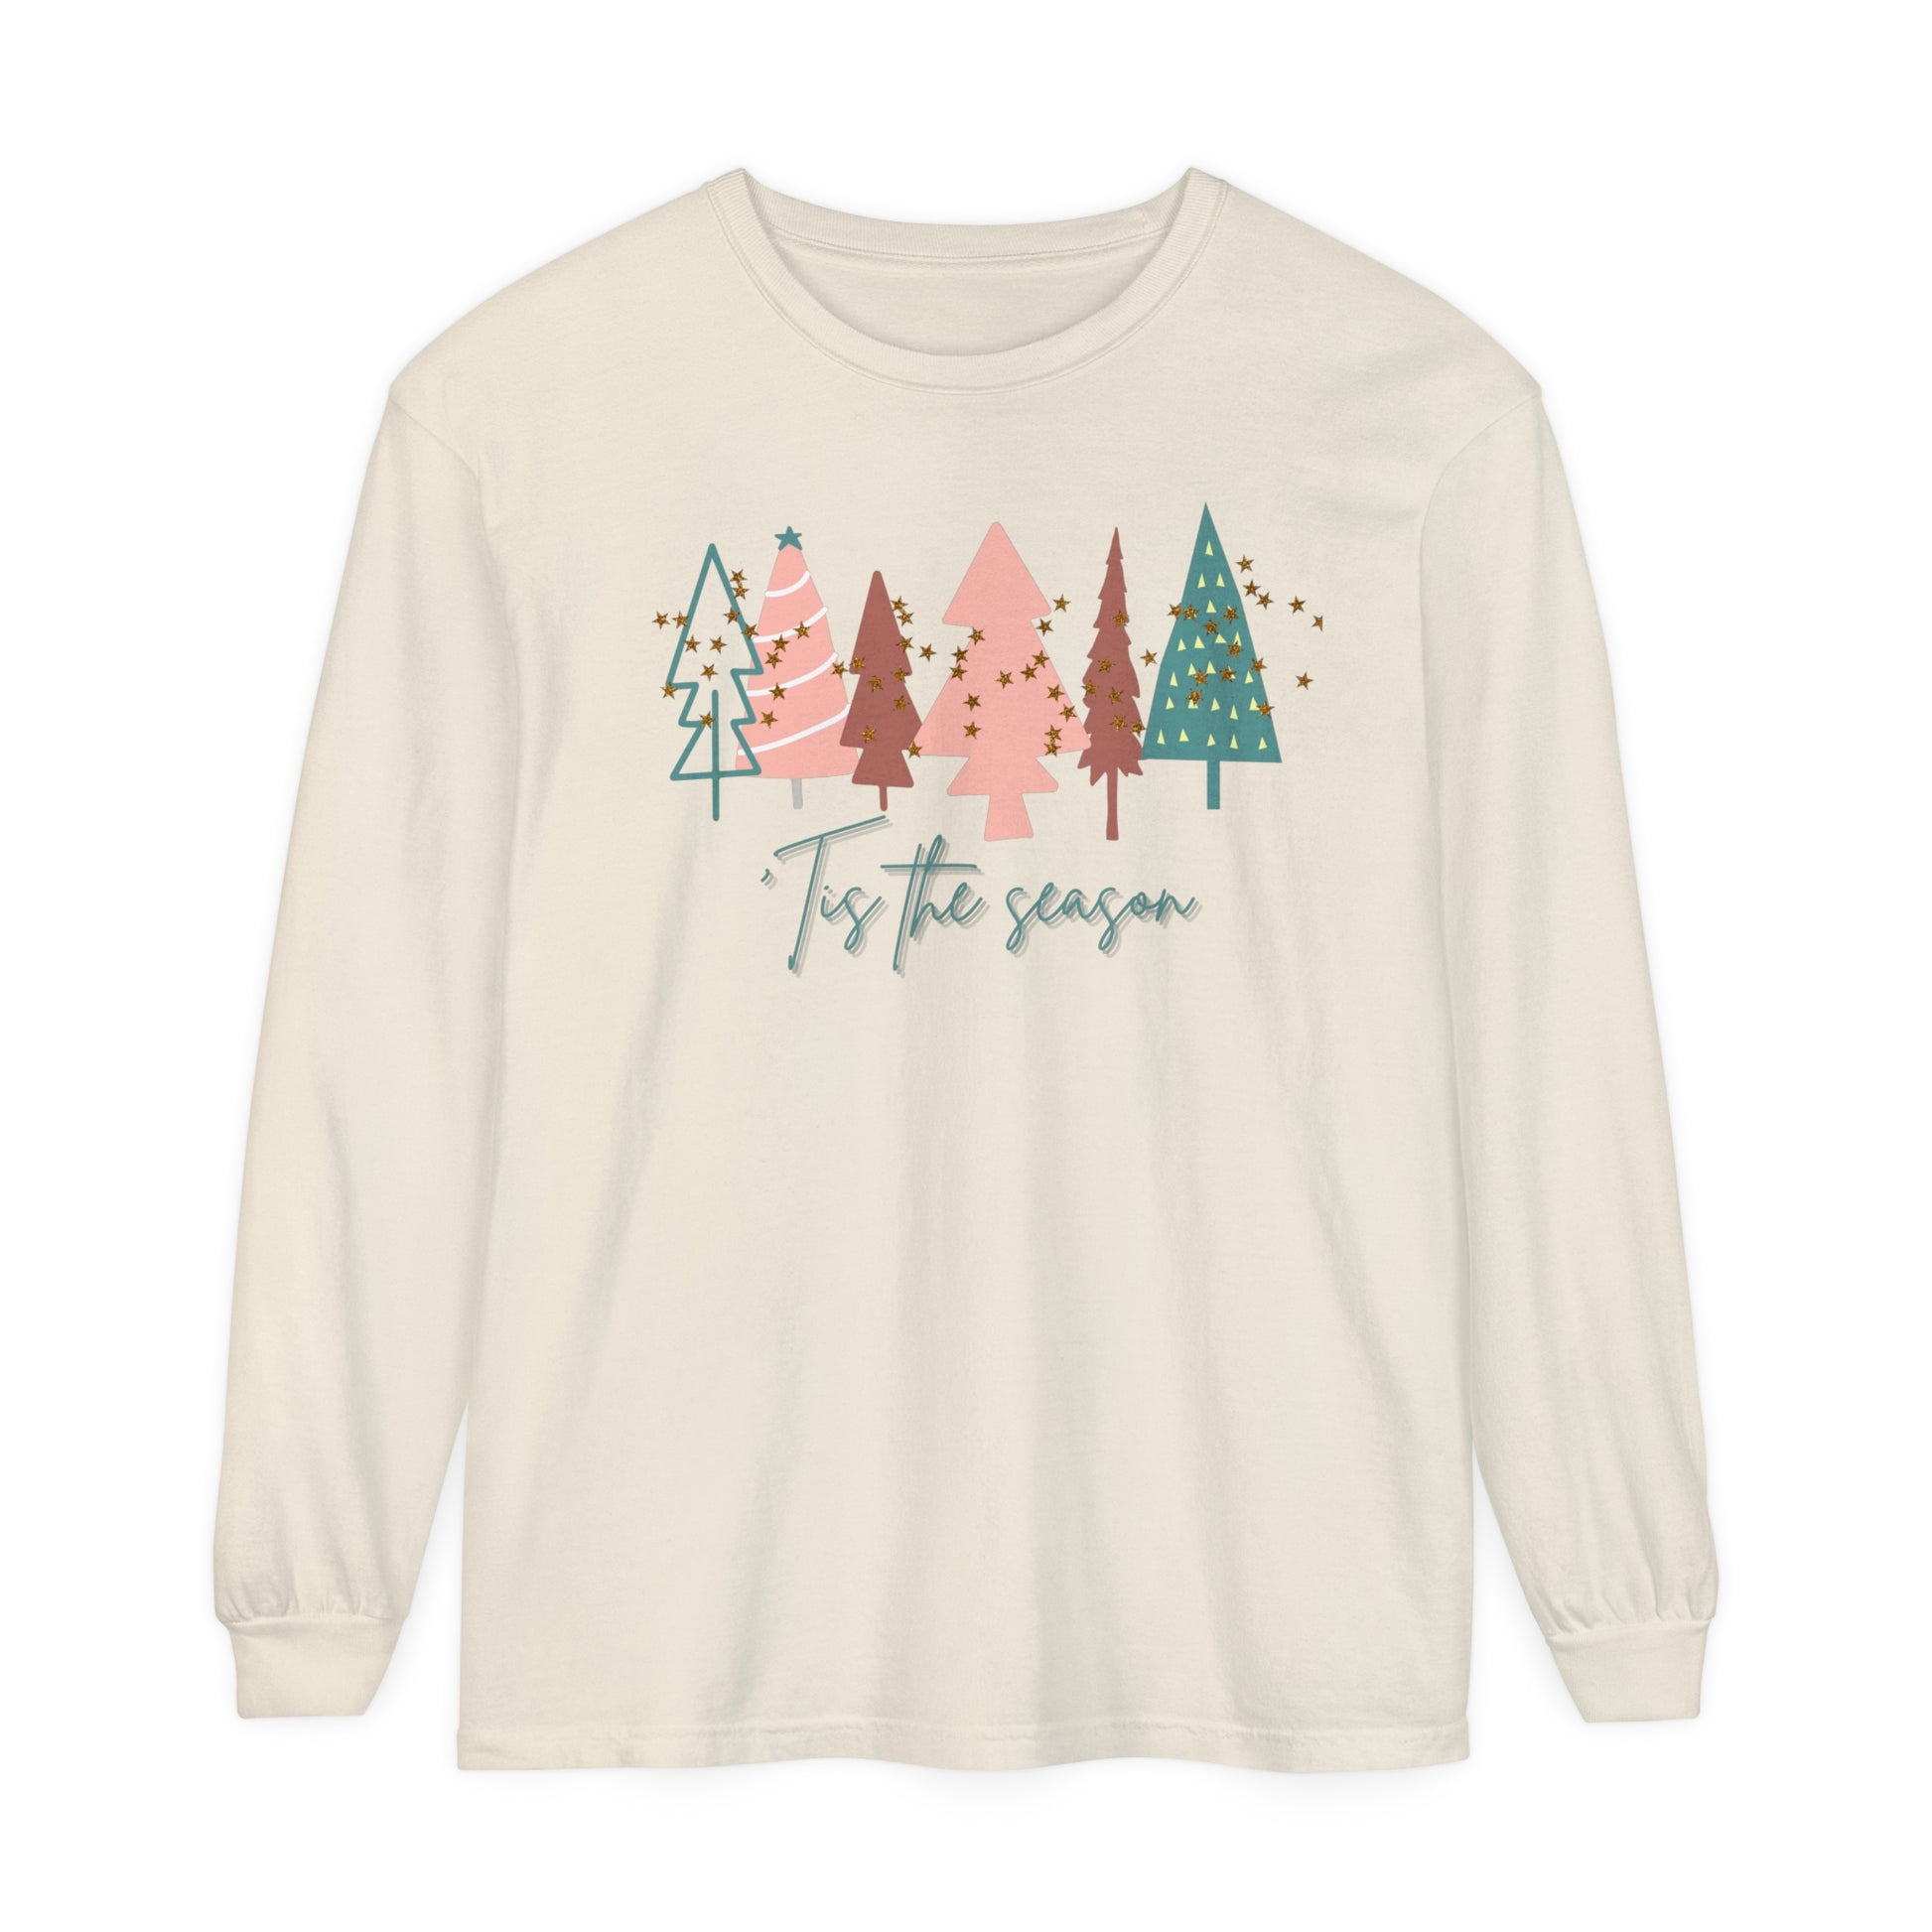 Upgrade your winter wardrobe with the comfortable and stylish Printify Women's 'Tis the Season Ivory Christmas Tree Shirt.